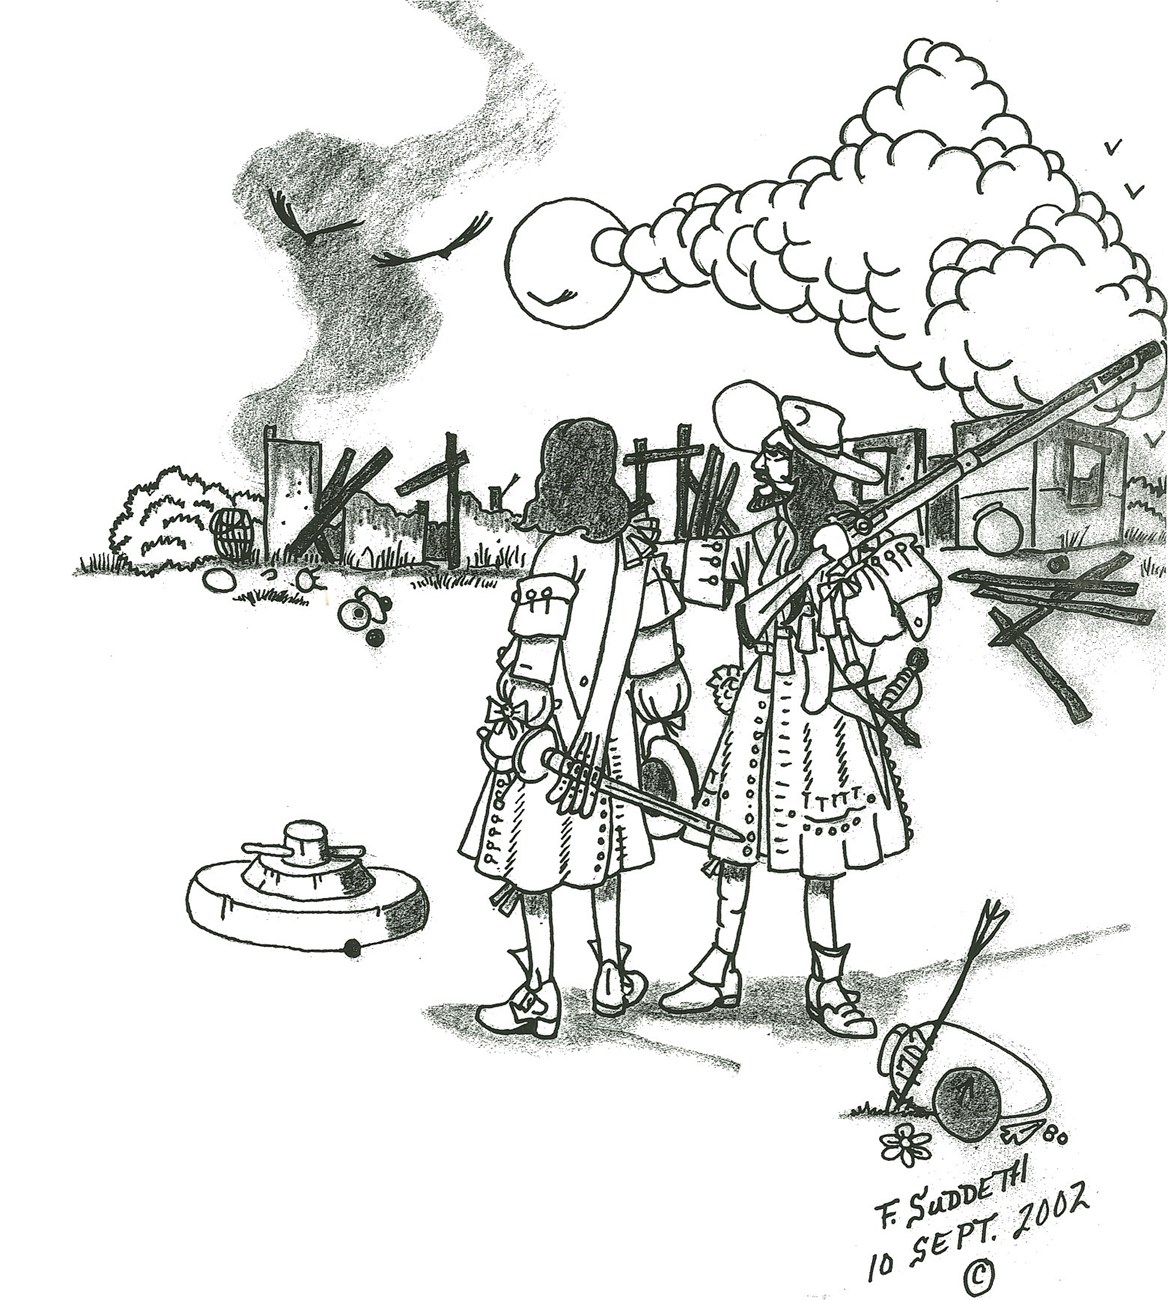 Coloring Page of the 1702 Siege aftermath with the town burning behind its citizens.